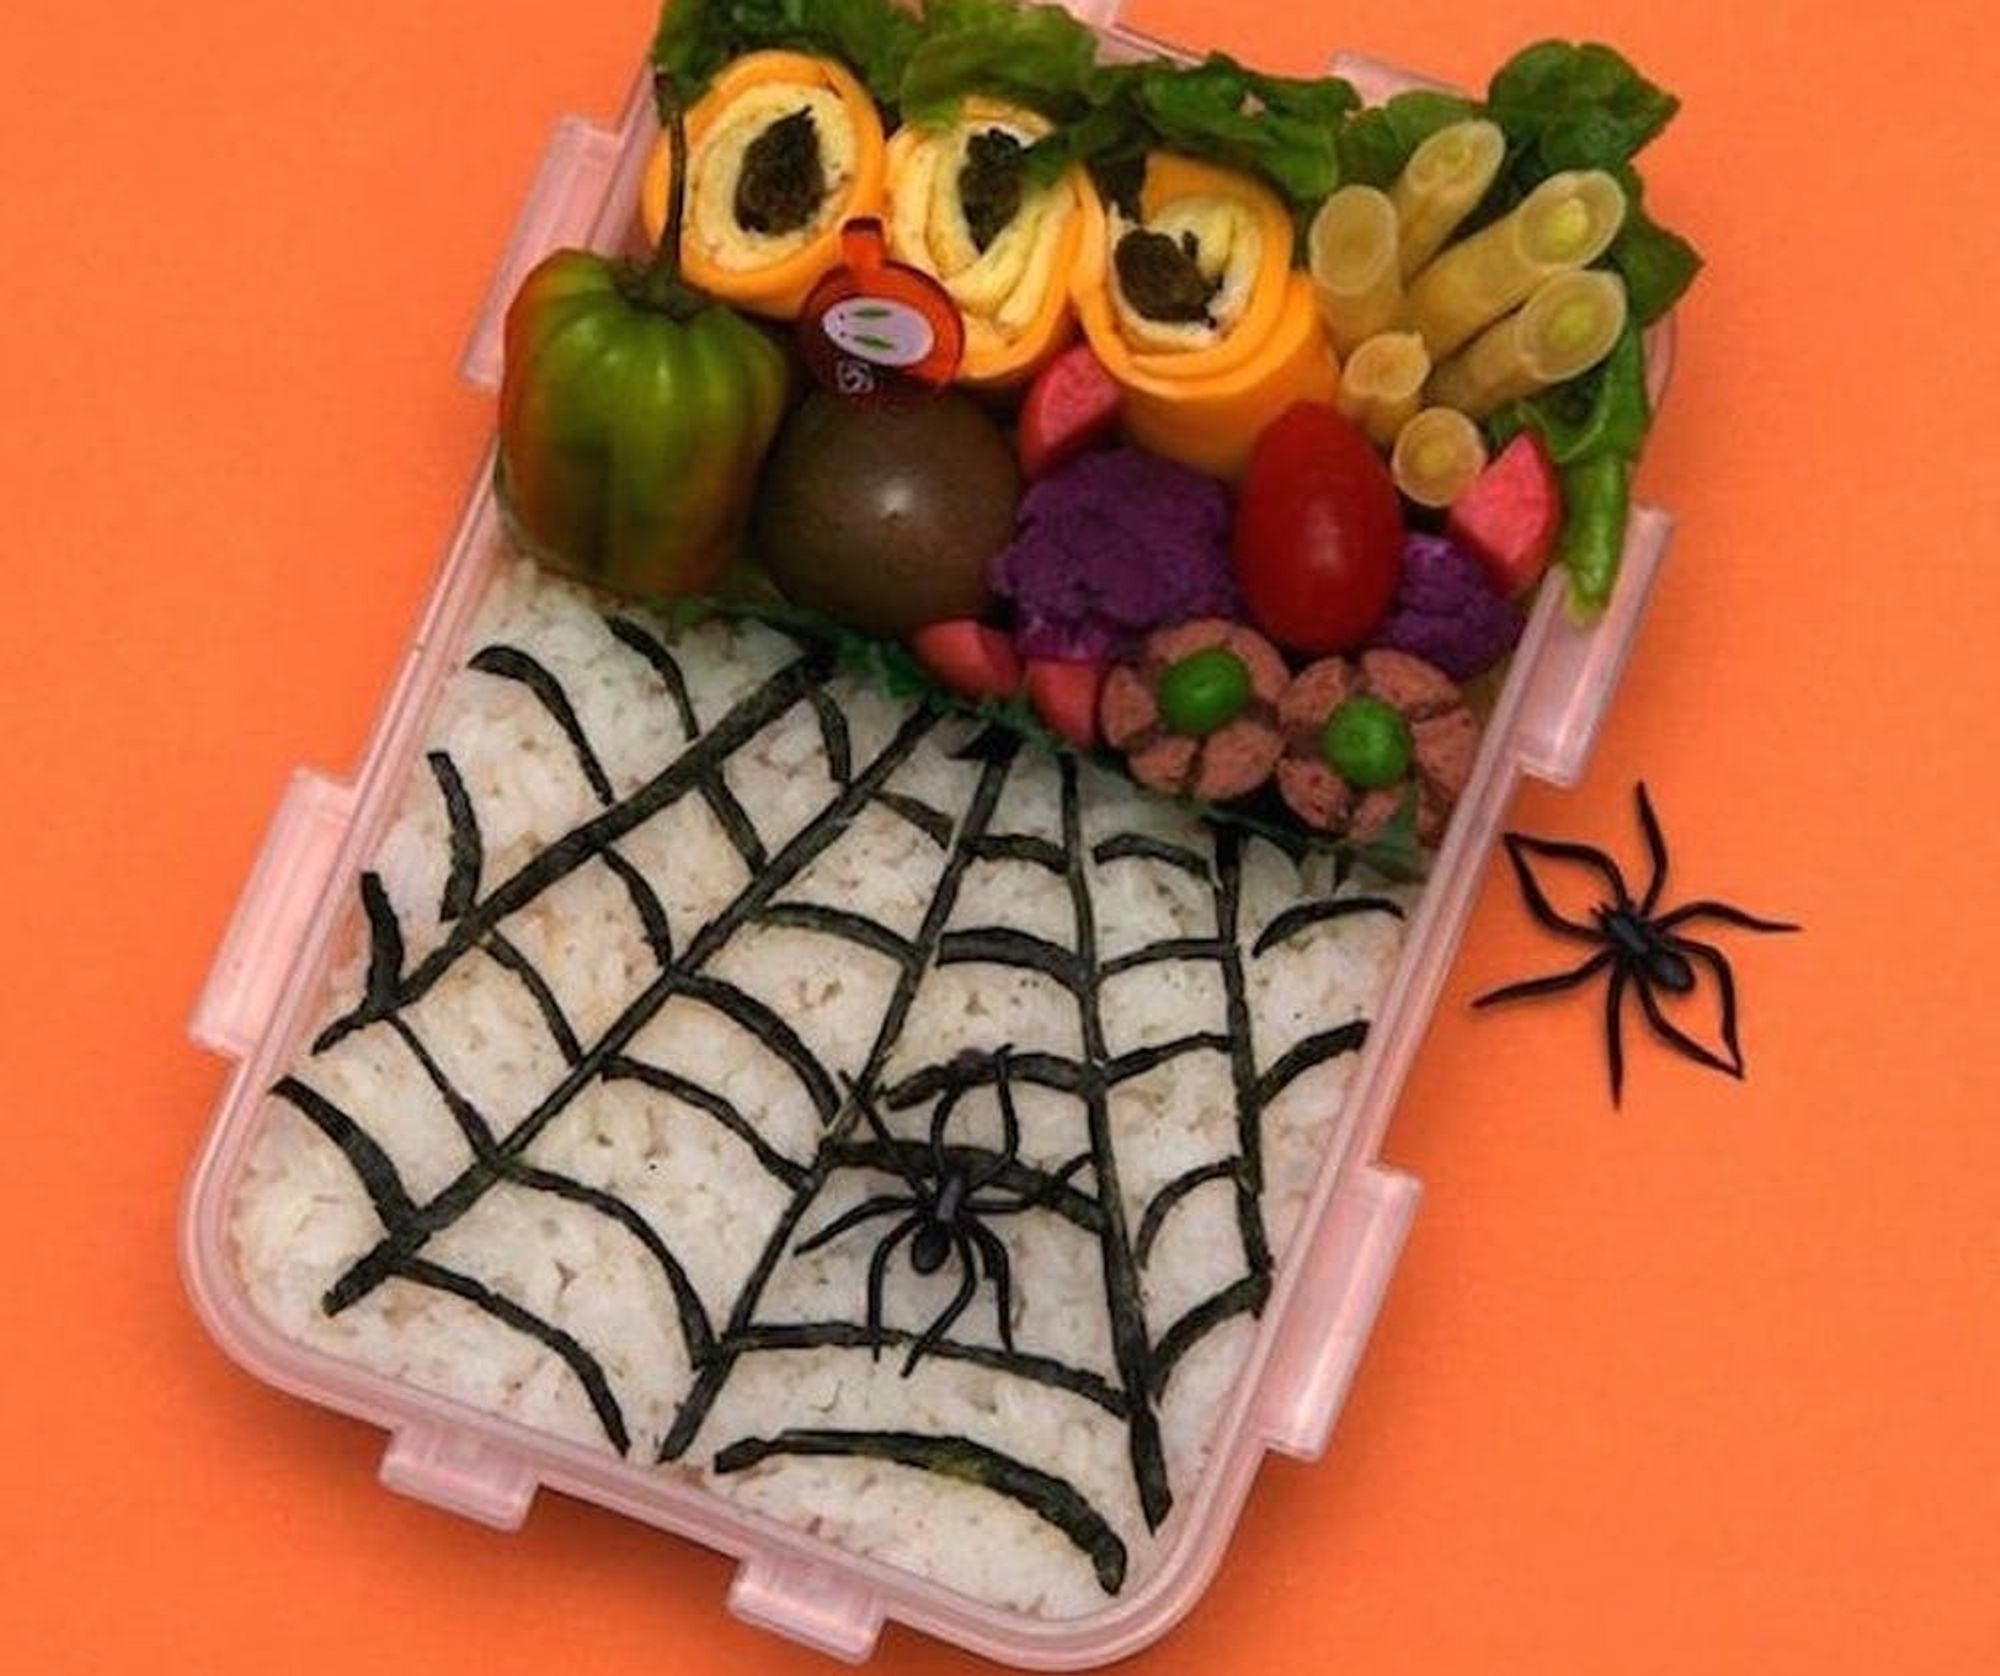 10 Super-Scary (But Also Very Cute) Bento Boxes for Halloween